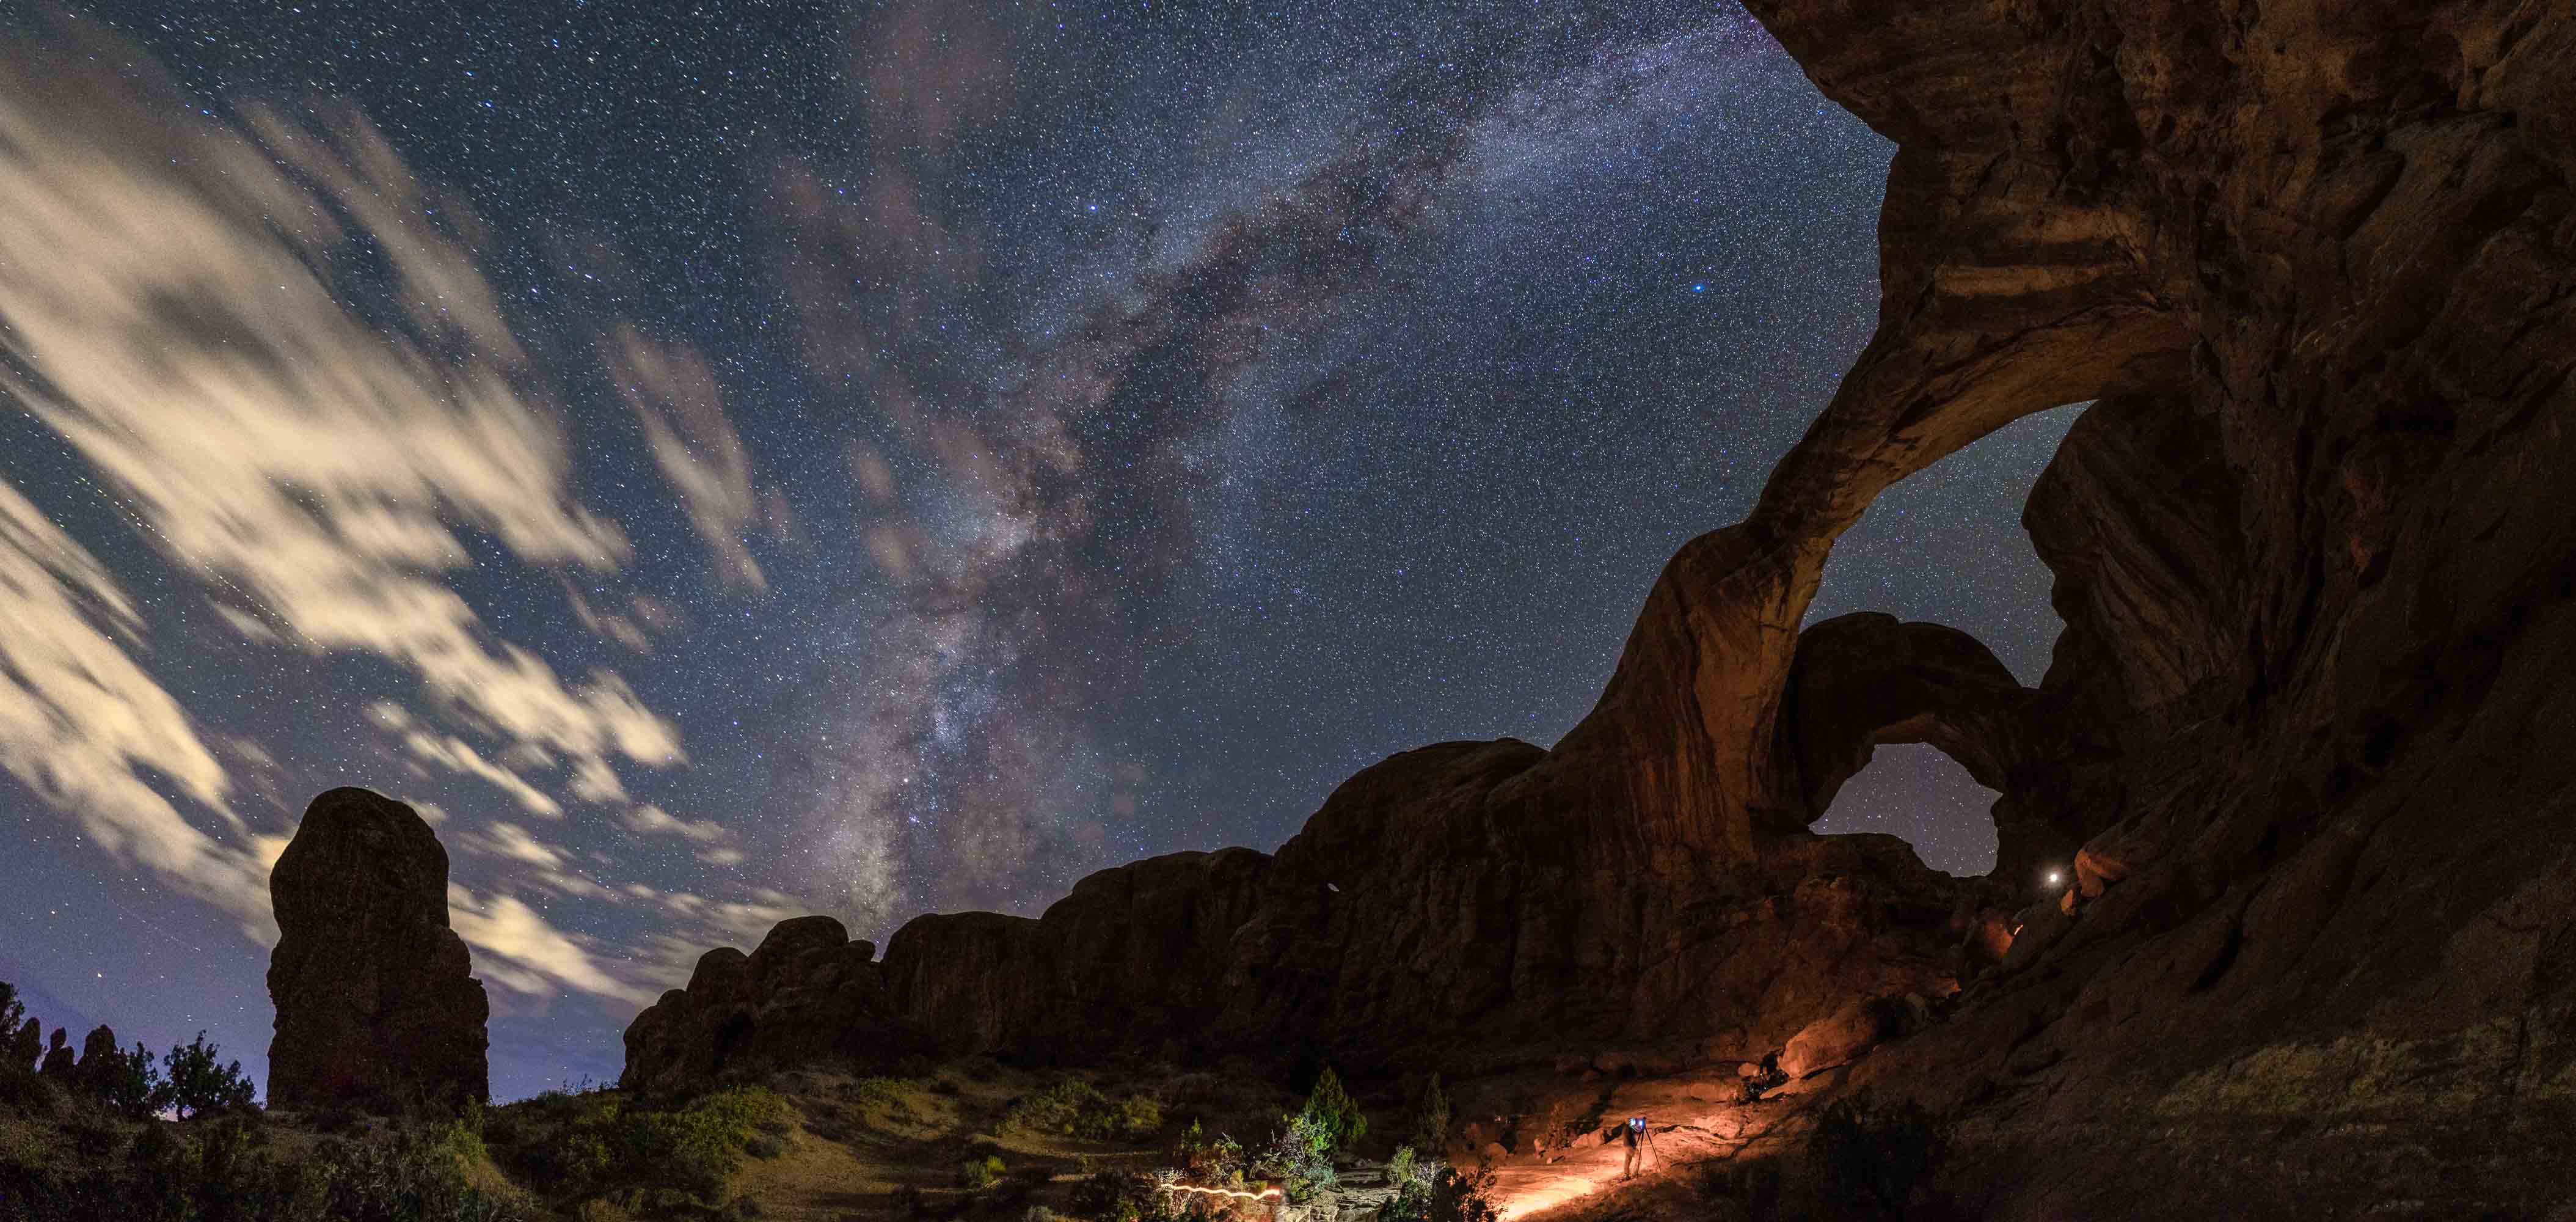 Milky Way over Double Arch, Arches National Park, Utah